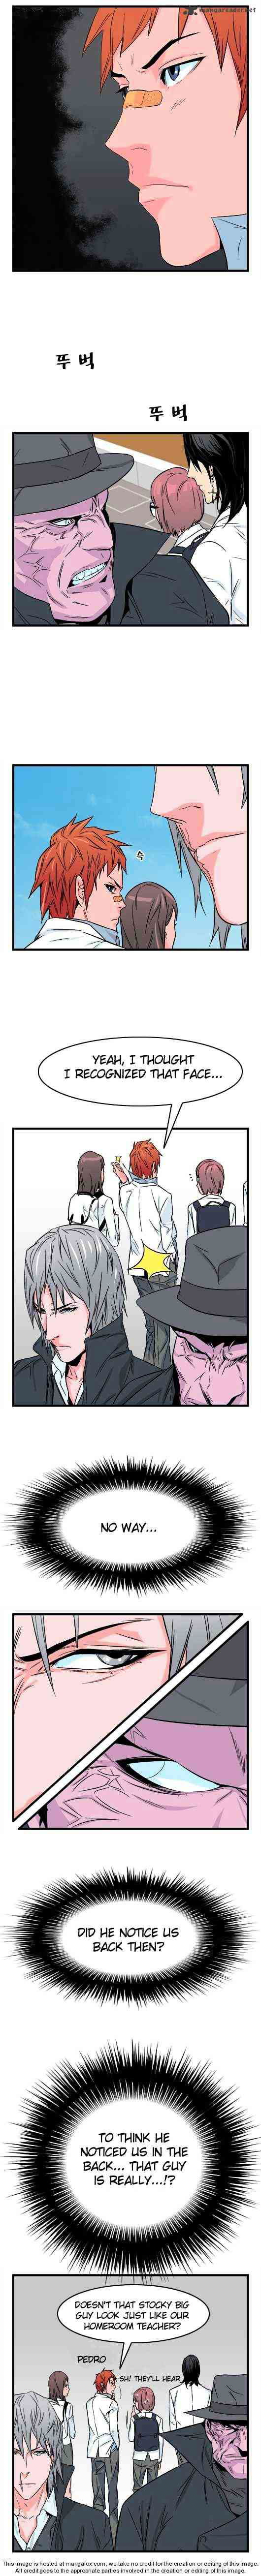 Noblesse Chapter 22 _ Chapters 22-30 page 5